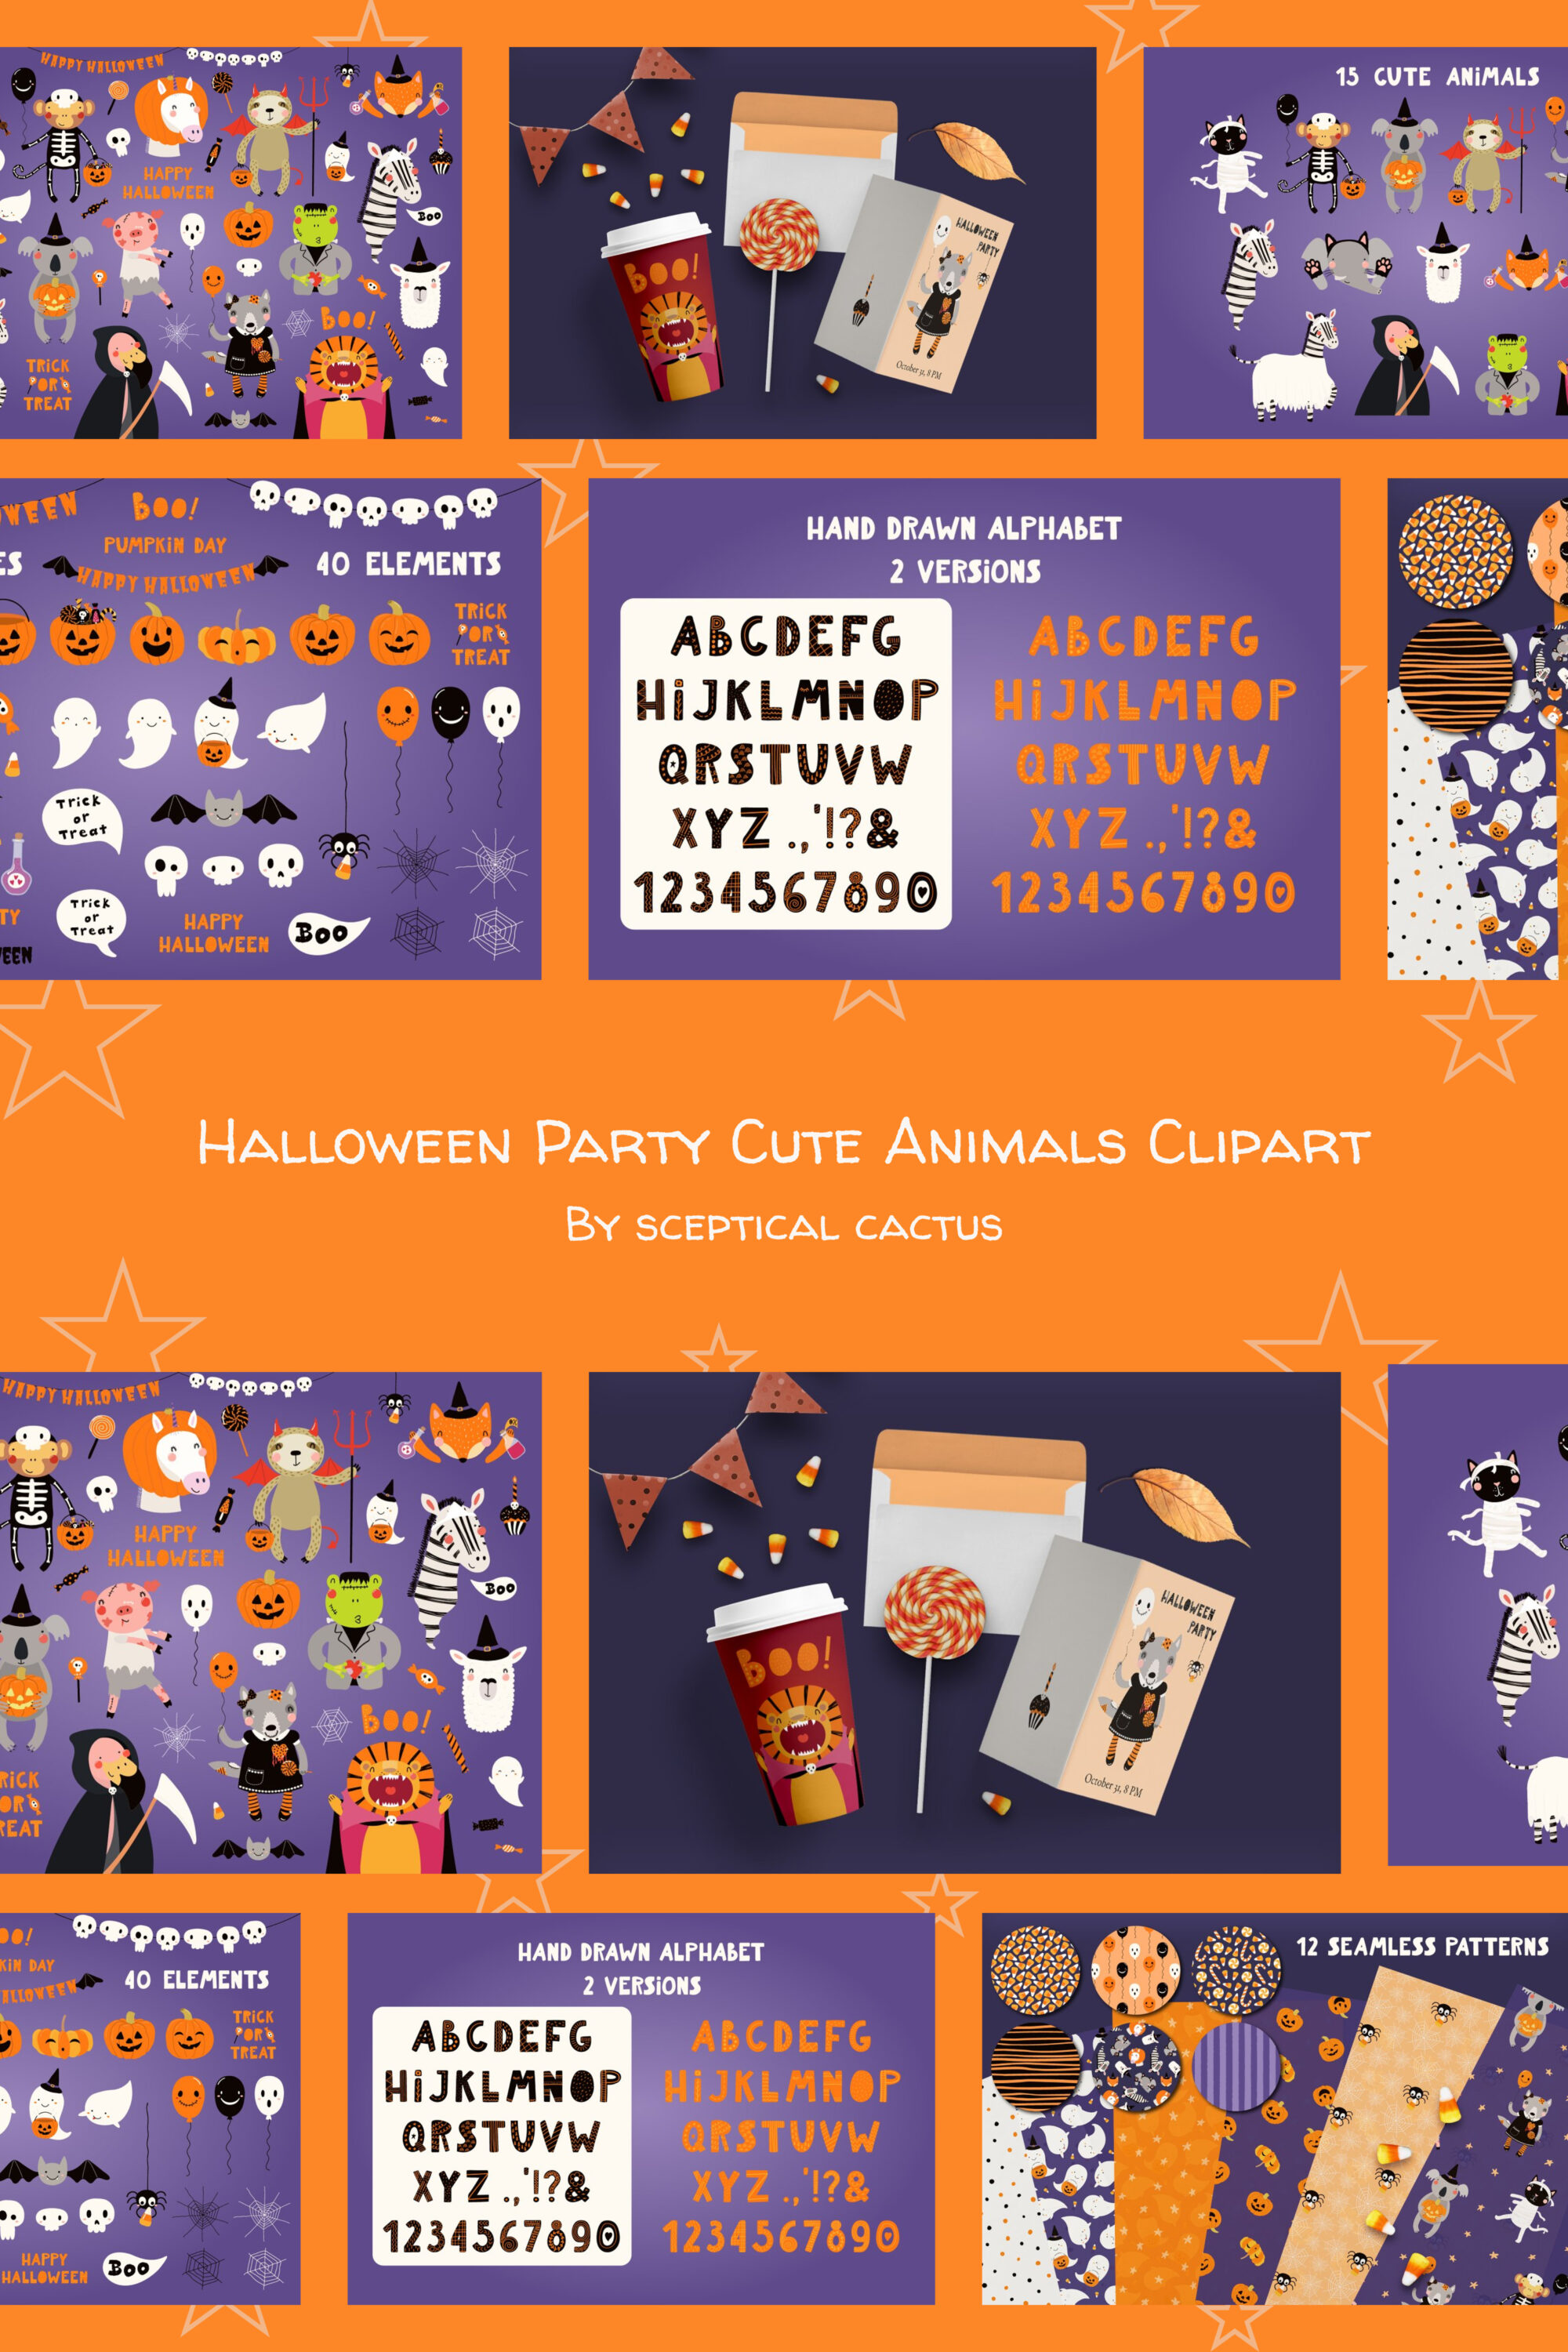 Halloween party cute animals clipart of pinterest.